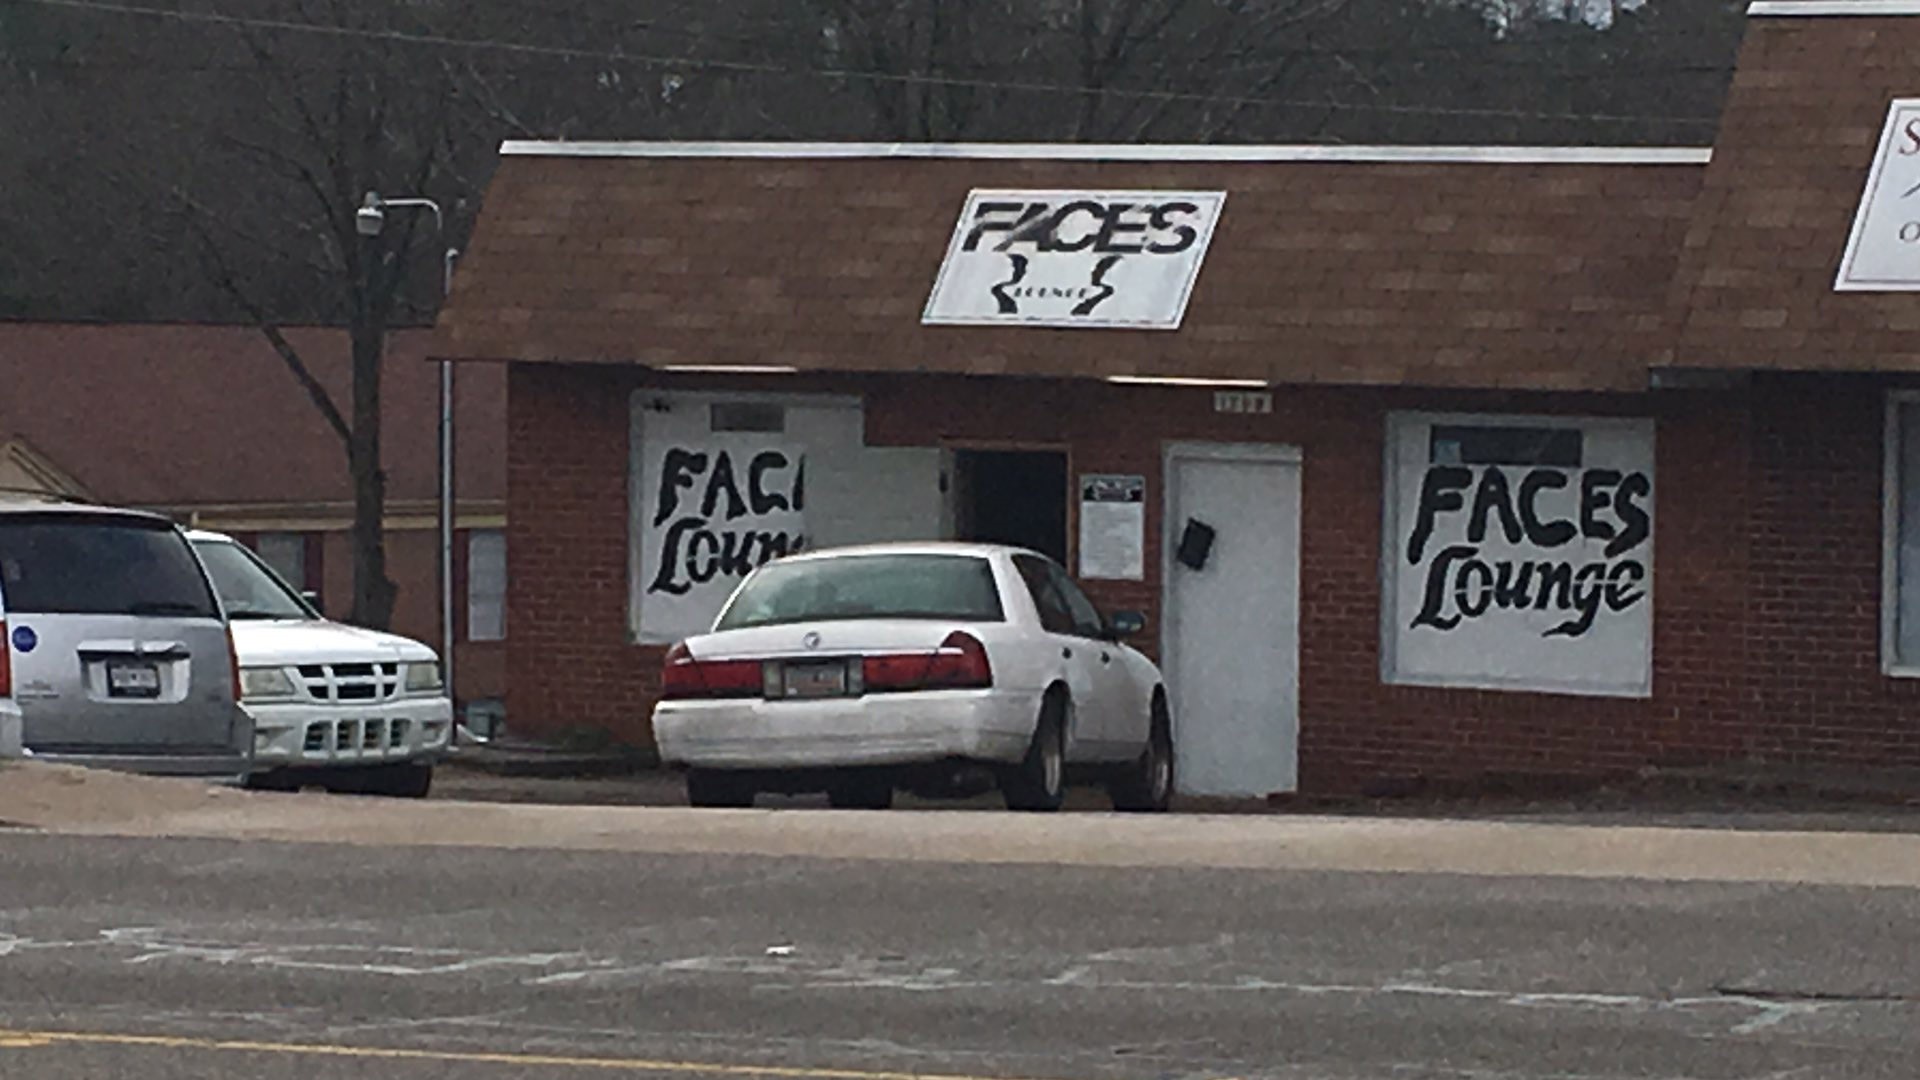 Five people were shot at the Faces Lounge on Decker Boulevard around 6:30 a.m. on New Year's Day.